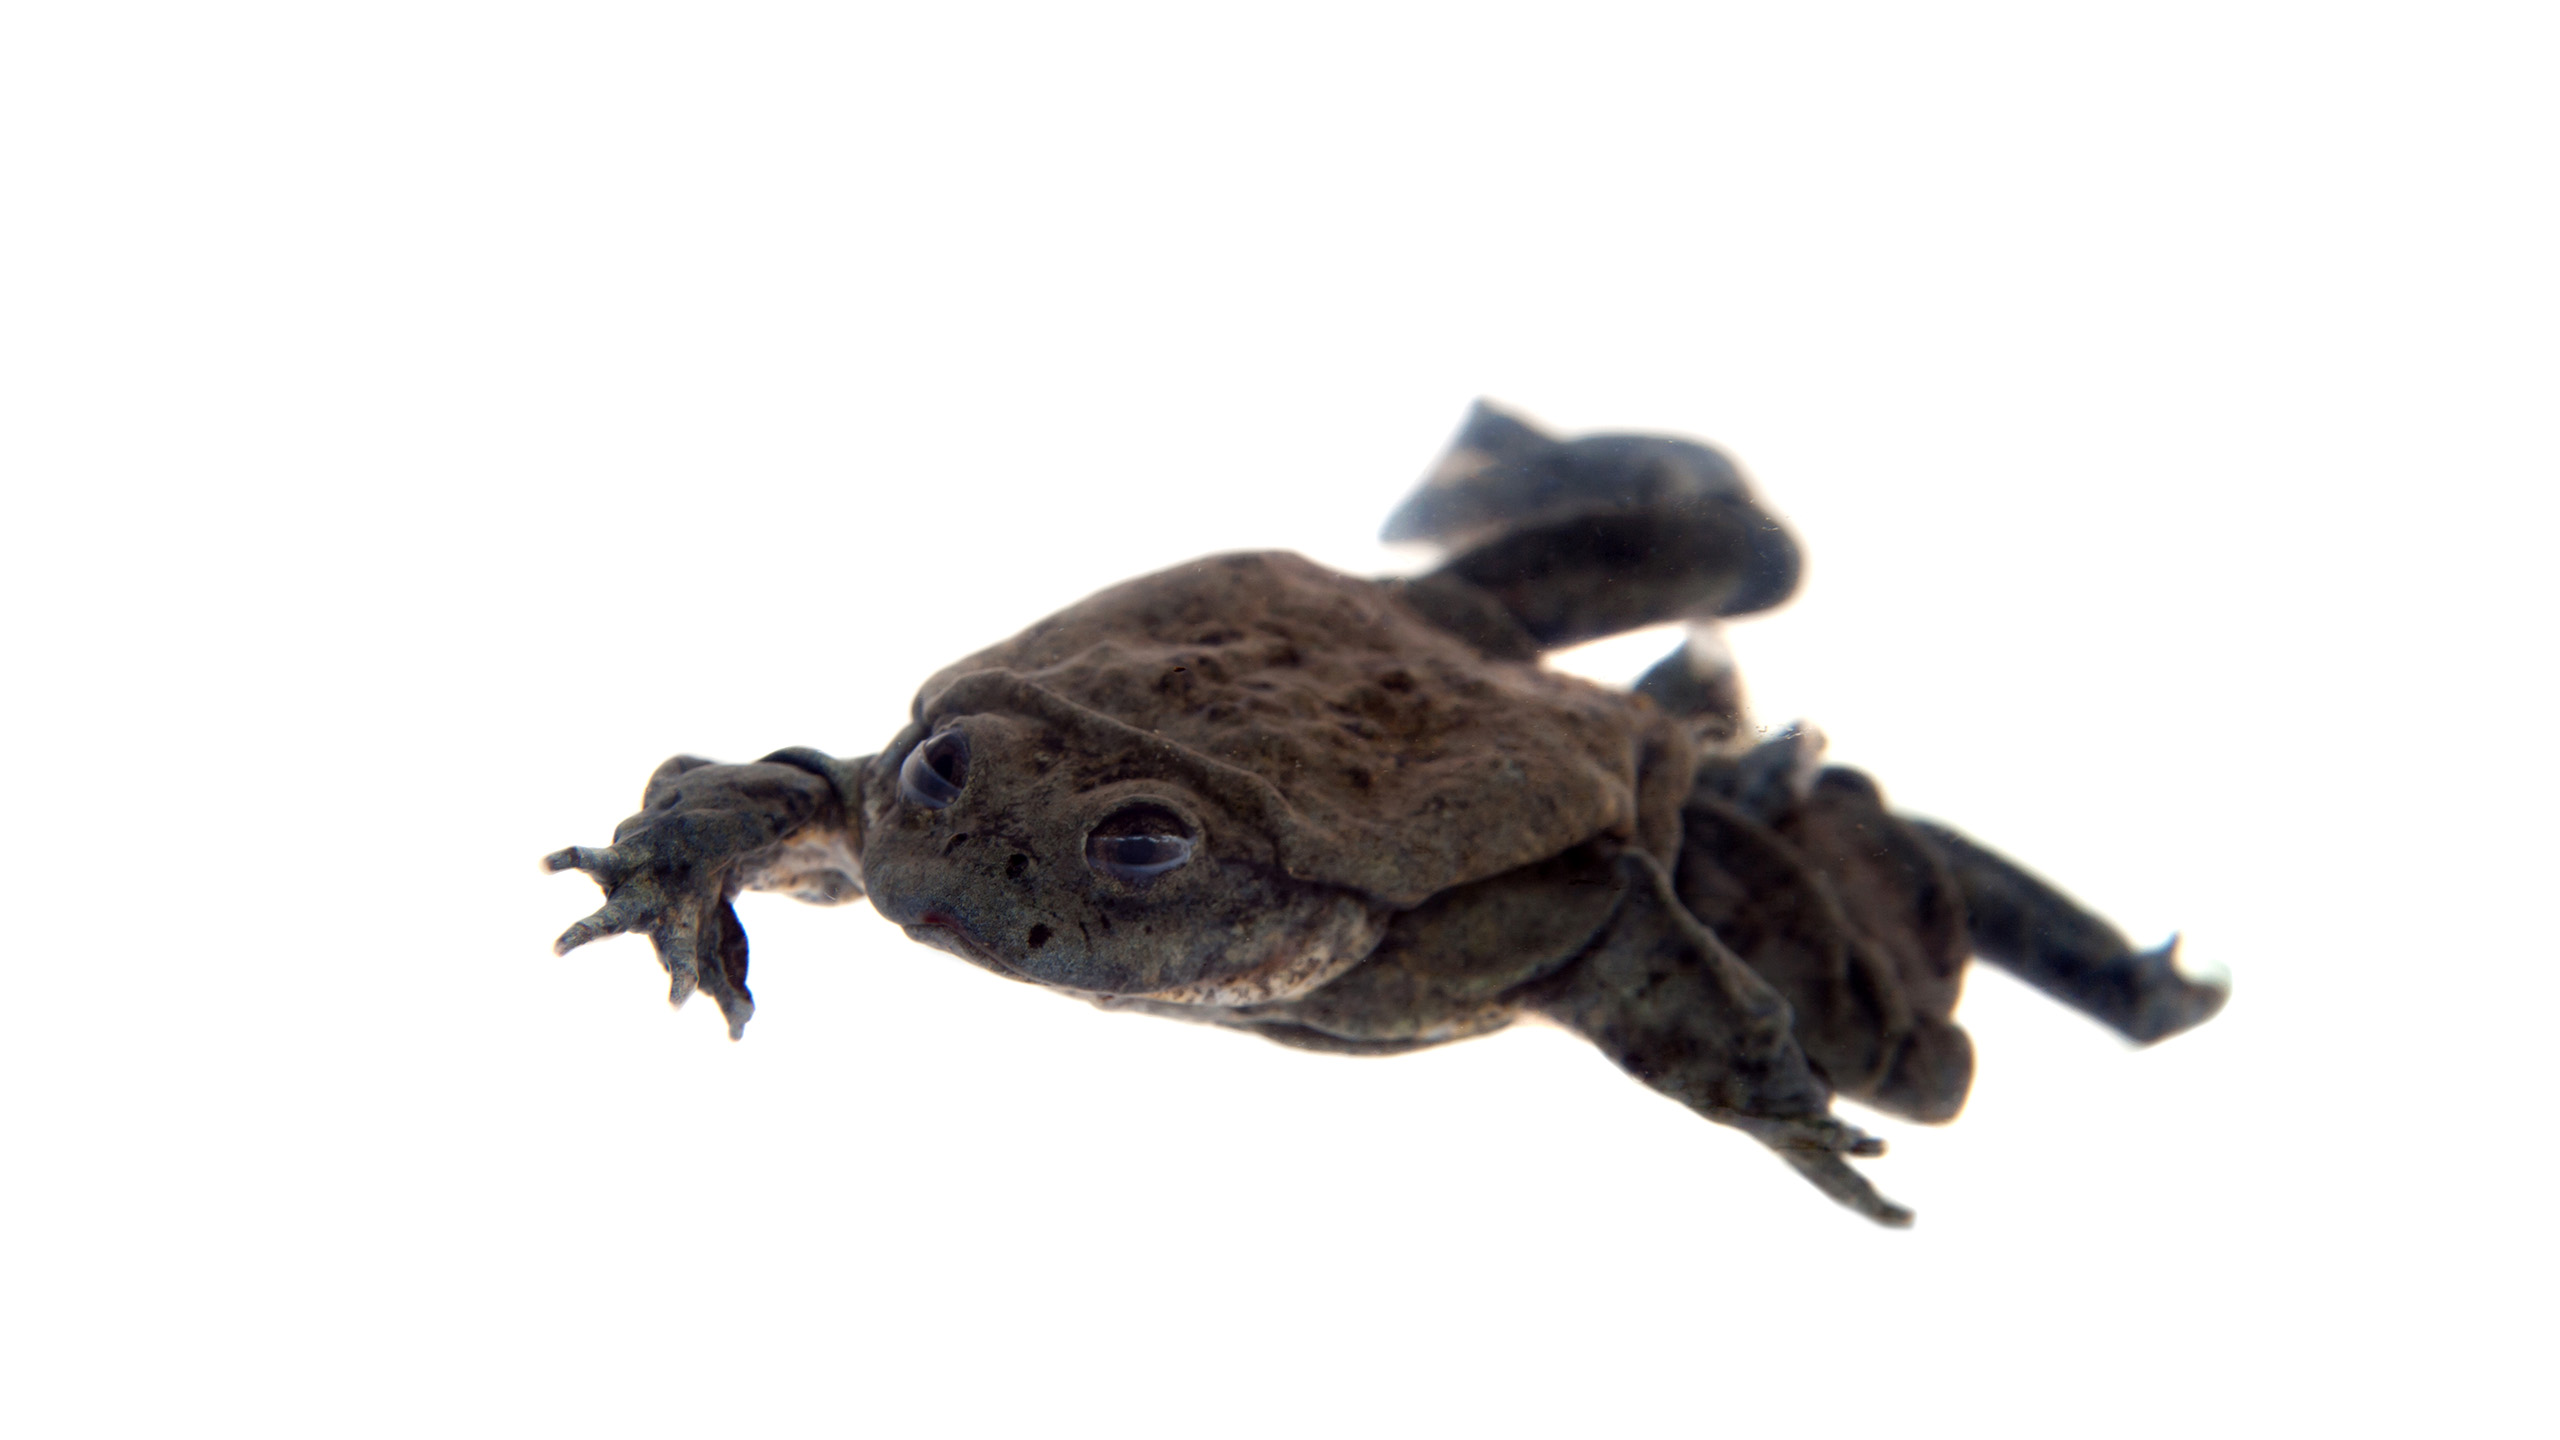 Citizen Conservation and European zoos also want to raise awareness of the critical situation of the Titicaca frog to a wider public through their conservation breeding program. | Rosa Jay, Shutterstock